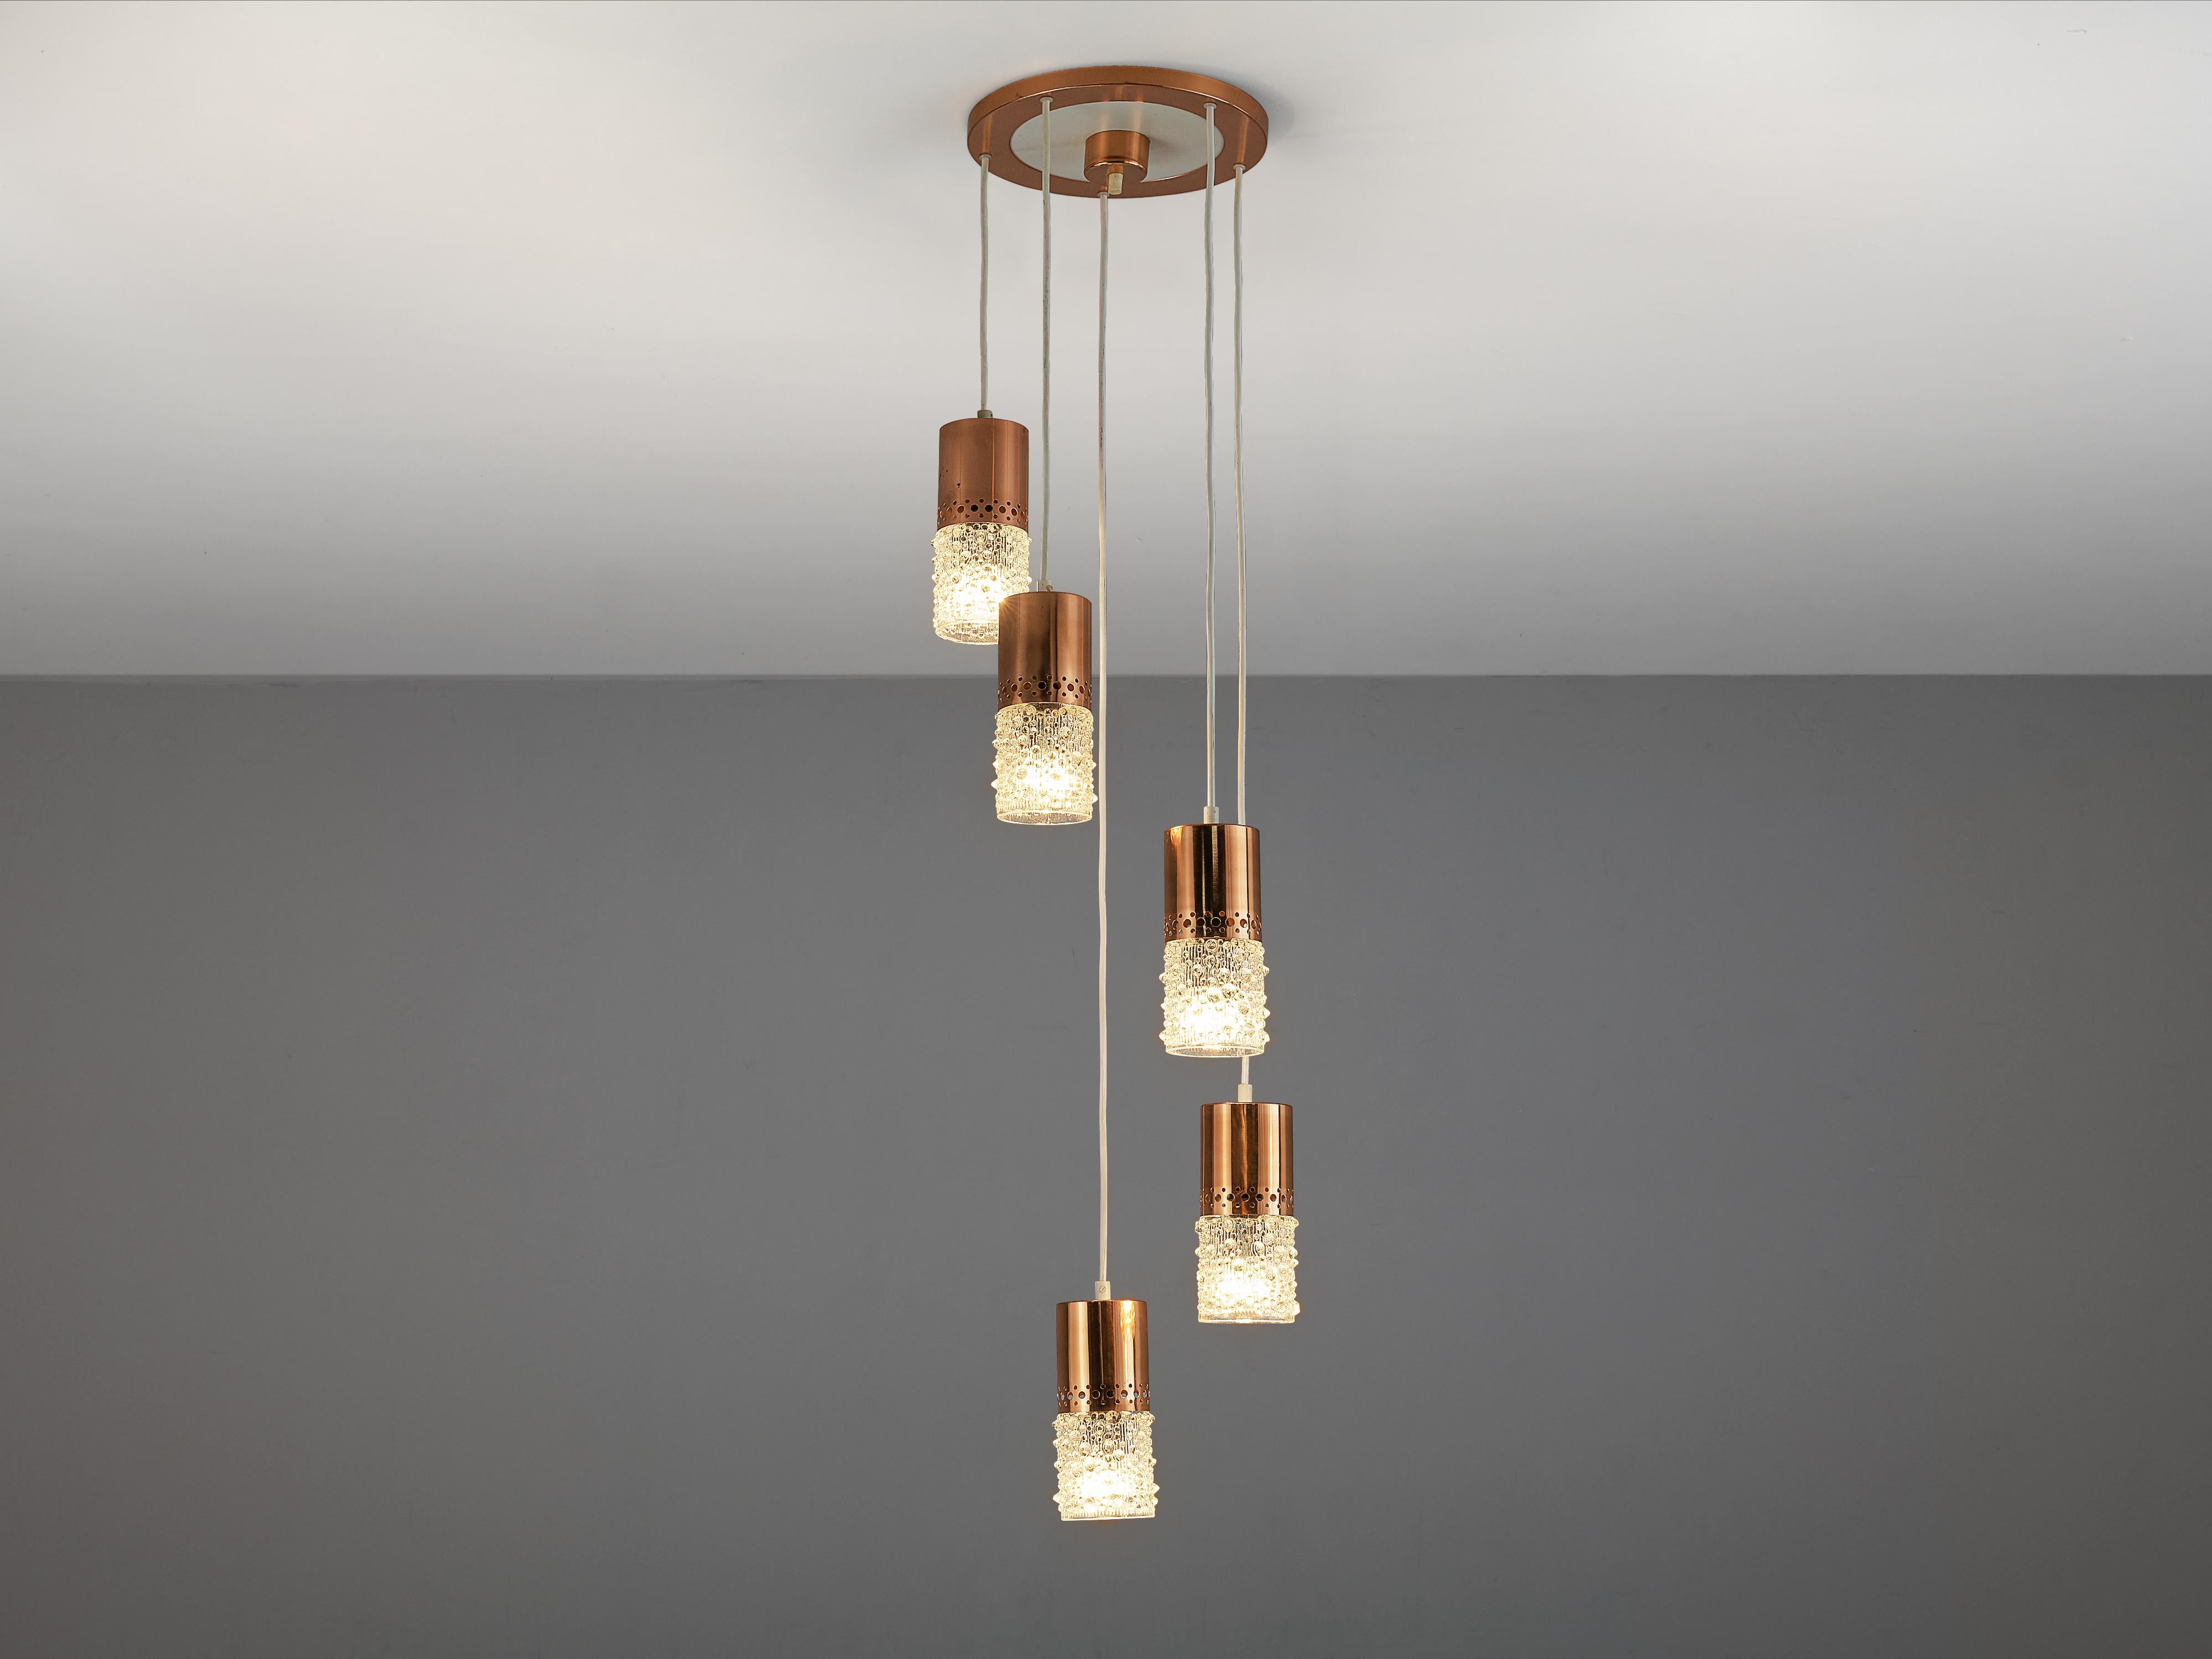 Ceiling light, glass, copper, Europe, 1970s

Wonderful ceiling light with five pendants. All lights feature a cylindrical copper base with a with a handblown glass shades. The structured glass, reminiscent of the style of Tapio Wirkkala, of the